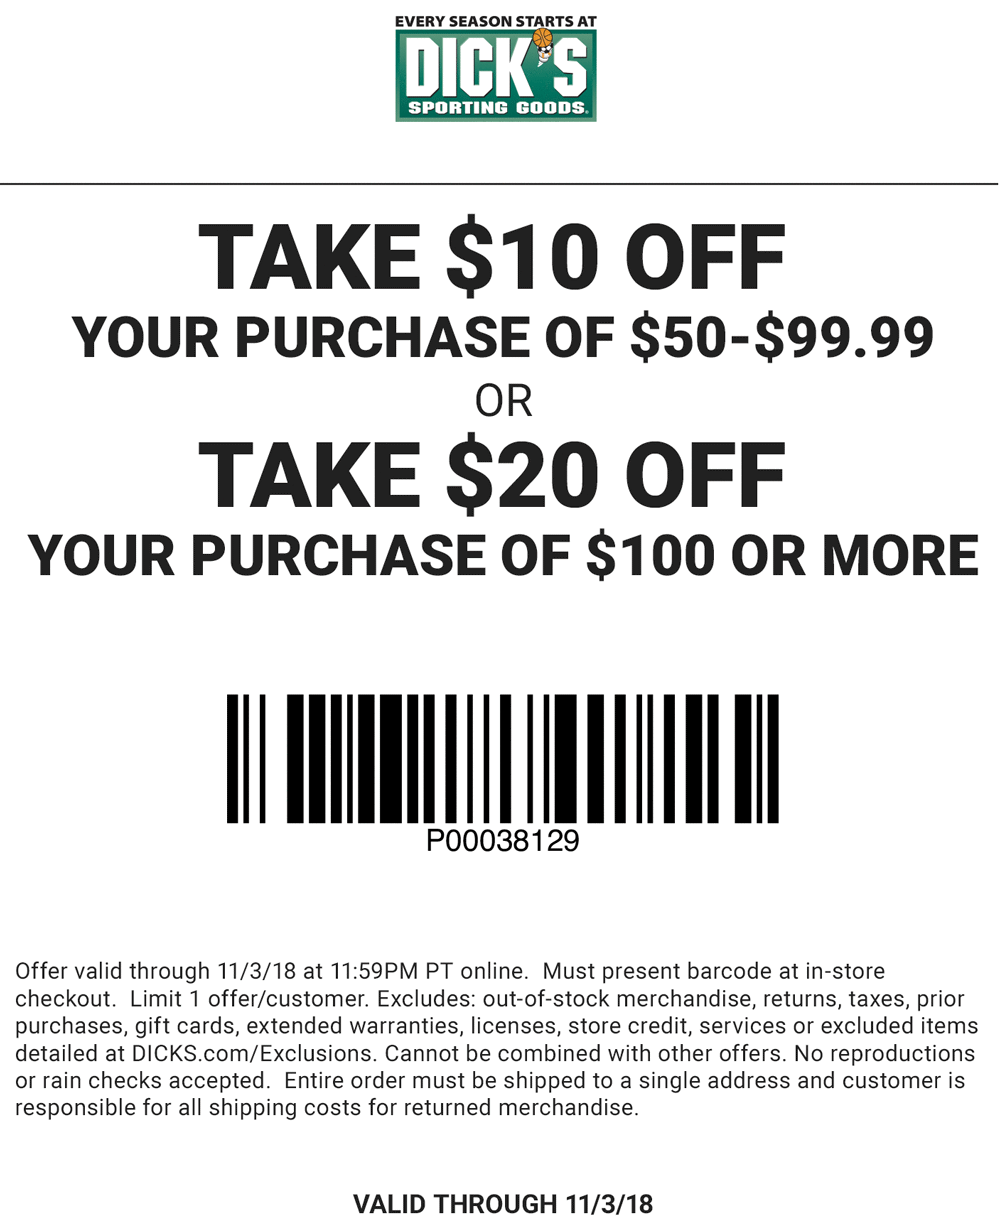 dicks-coupons-20-off-100-at-dicks-sporting-goods-ditto-online